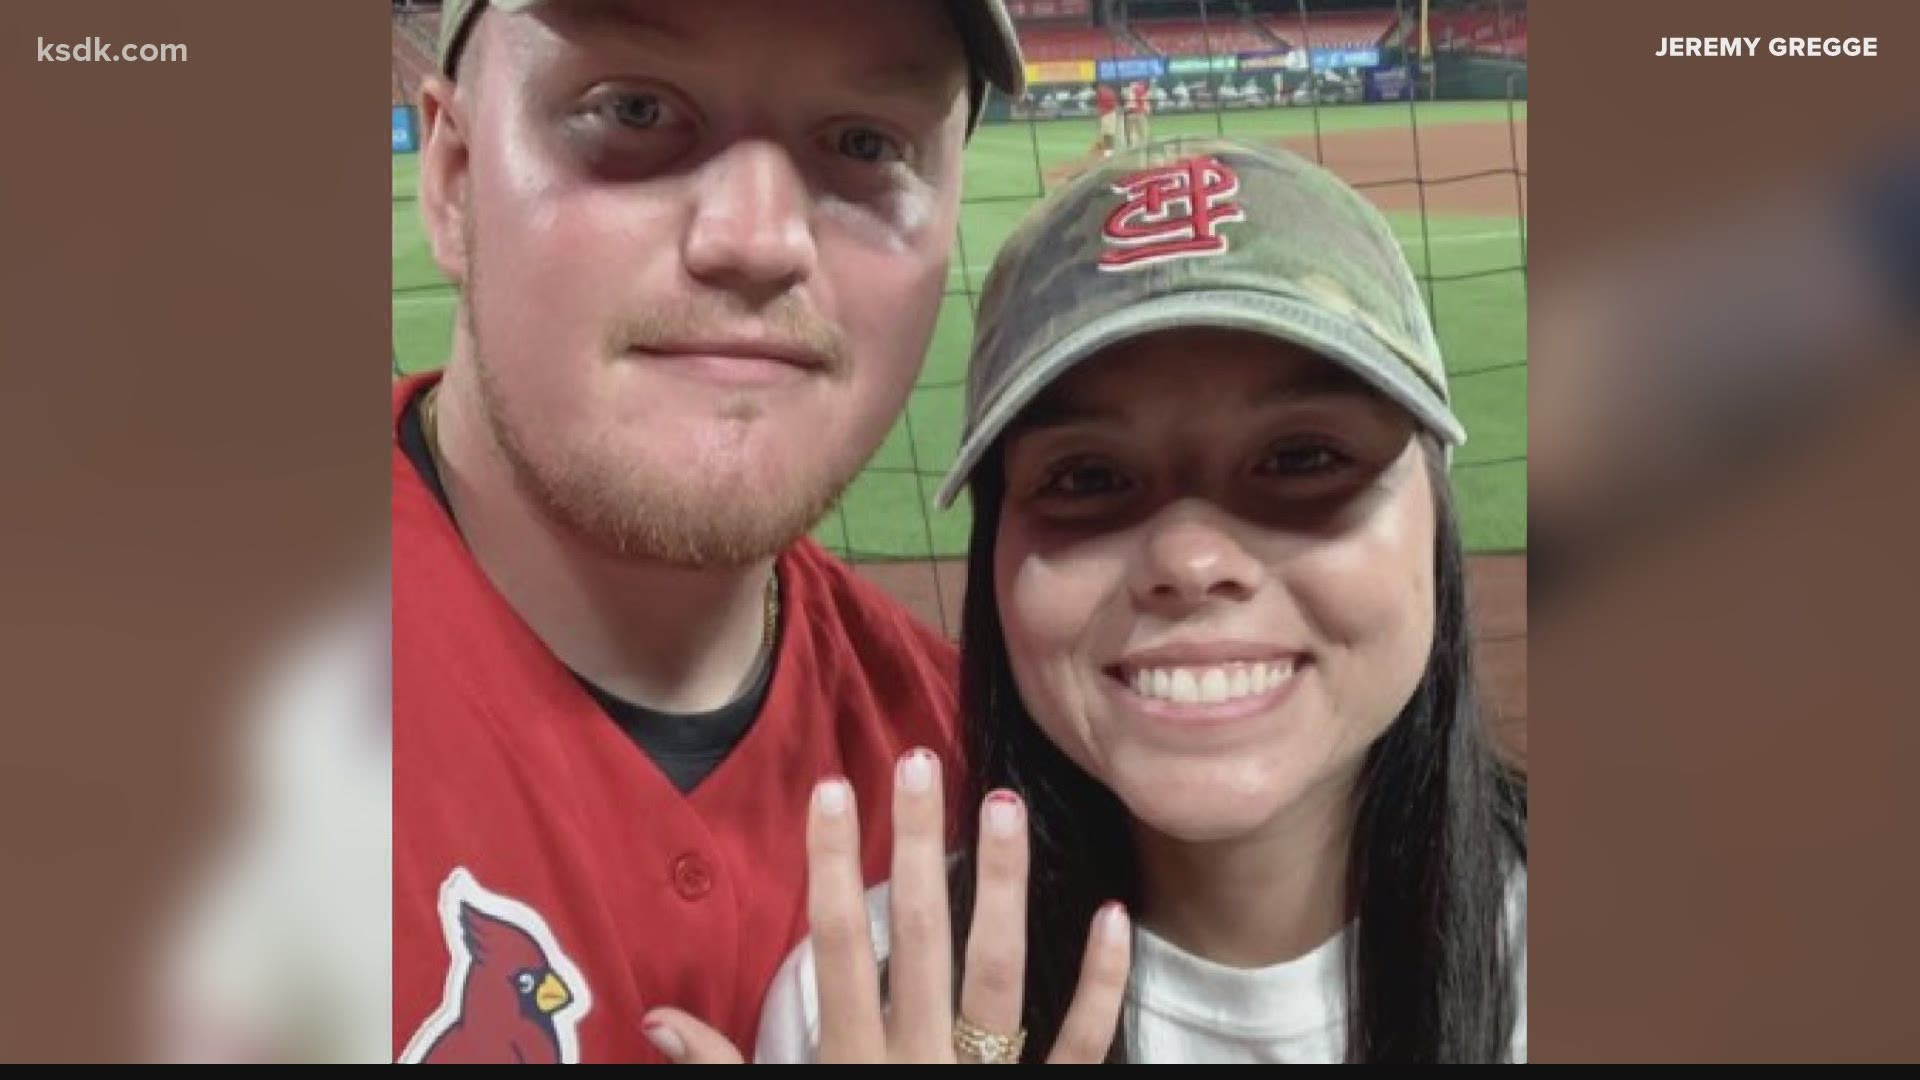 Yadier Molina gives couple engagement story to remember